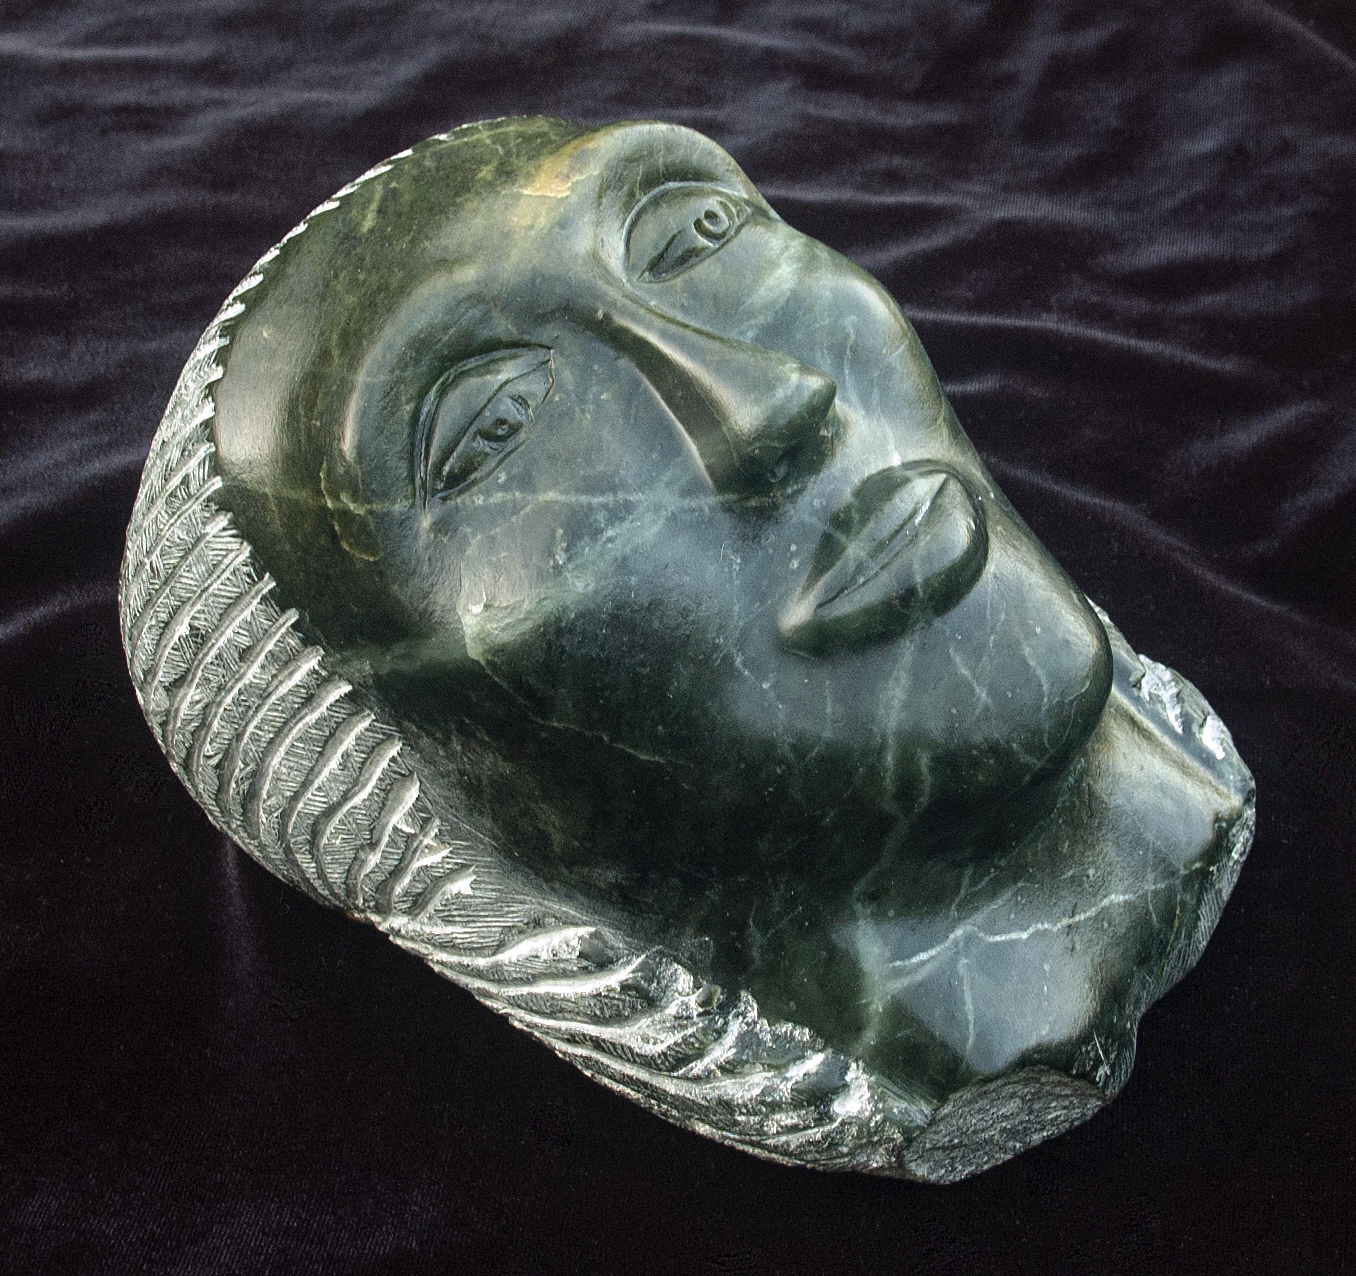 Face soapstone 2019 8x6x5in